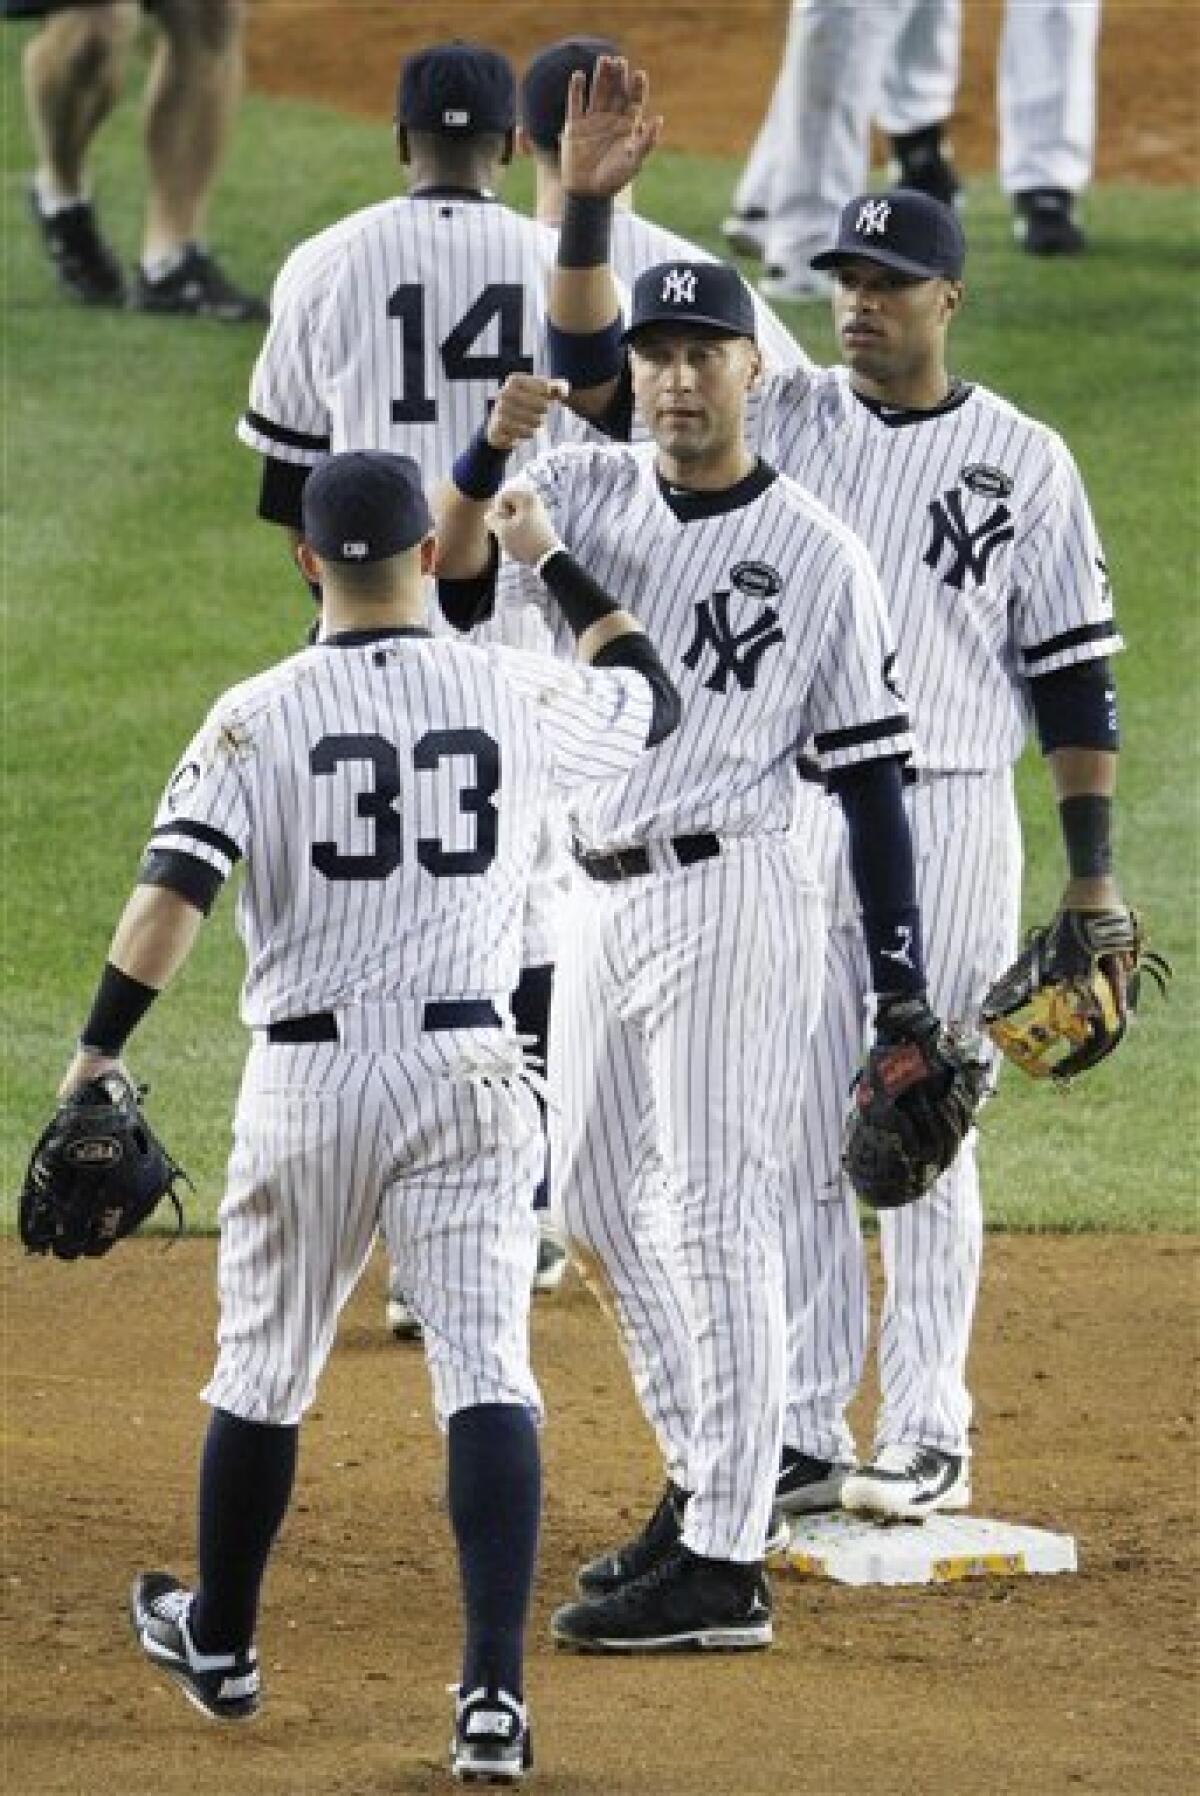 With CC Sabathia, Mariano Rivera and Derek Jeter still recovering